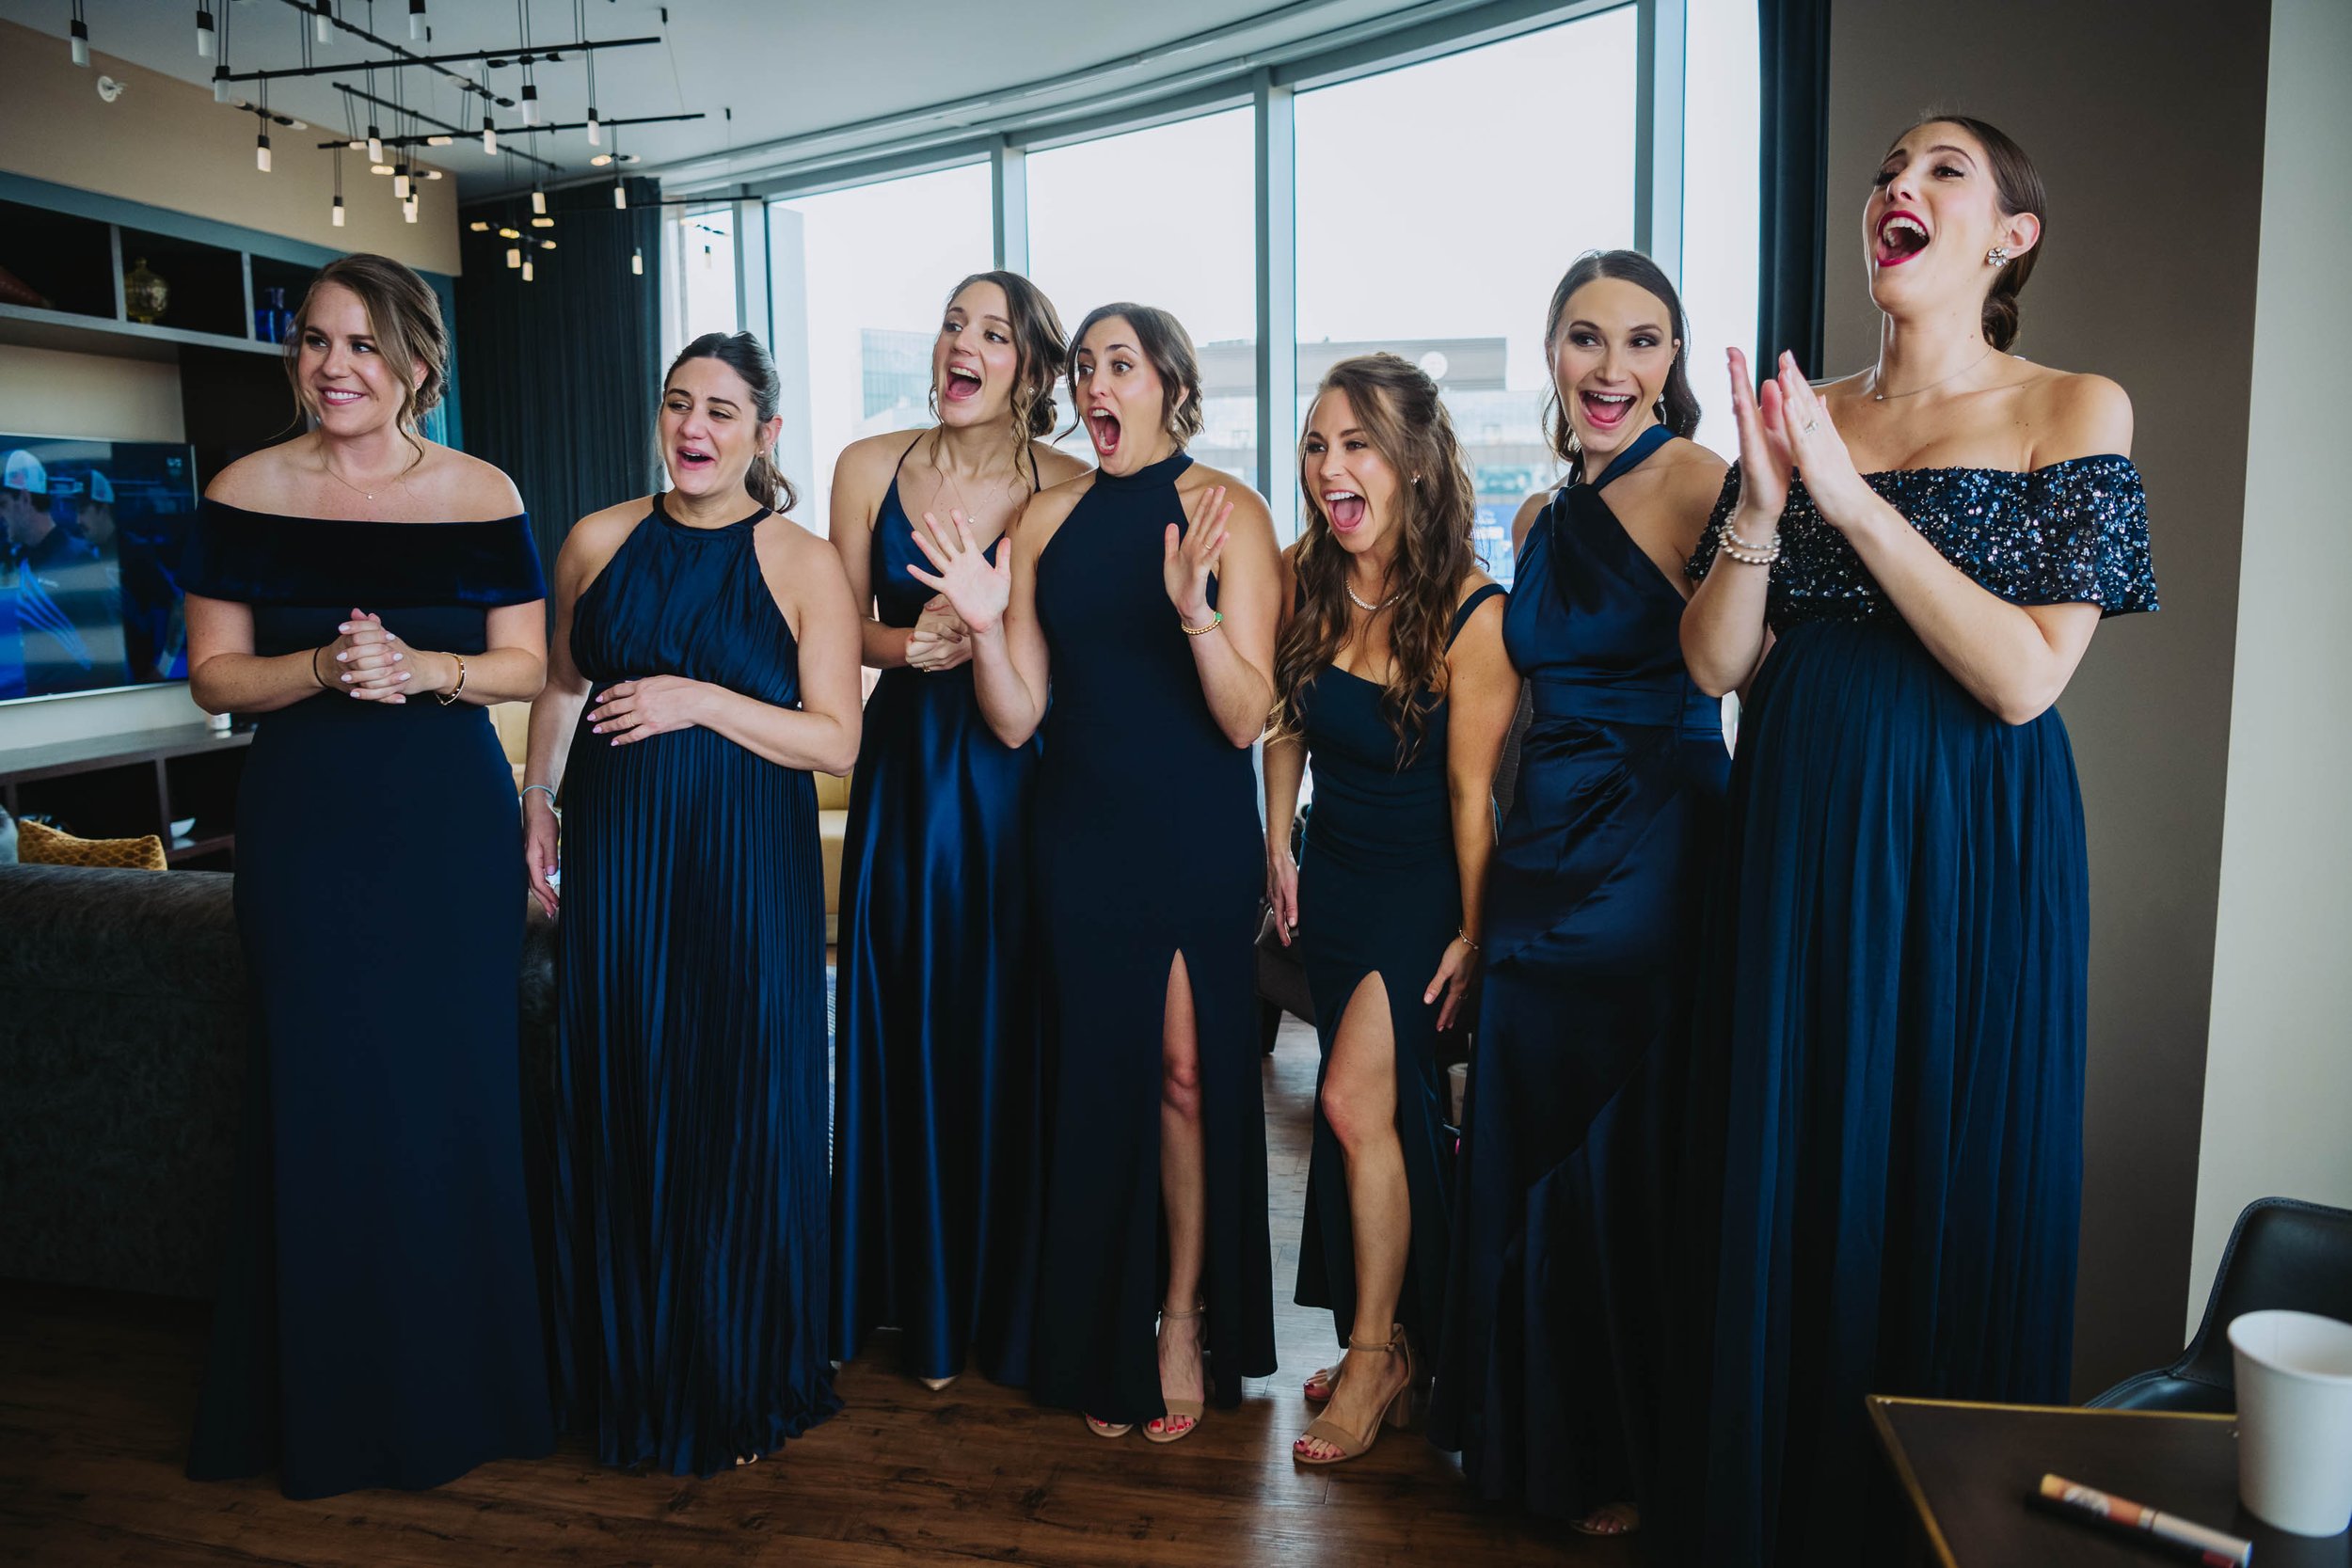 Top Wedding Photographers Near Me | Ravenswood Event Center | J. Brown Photography | bridesmaids first look